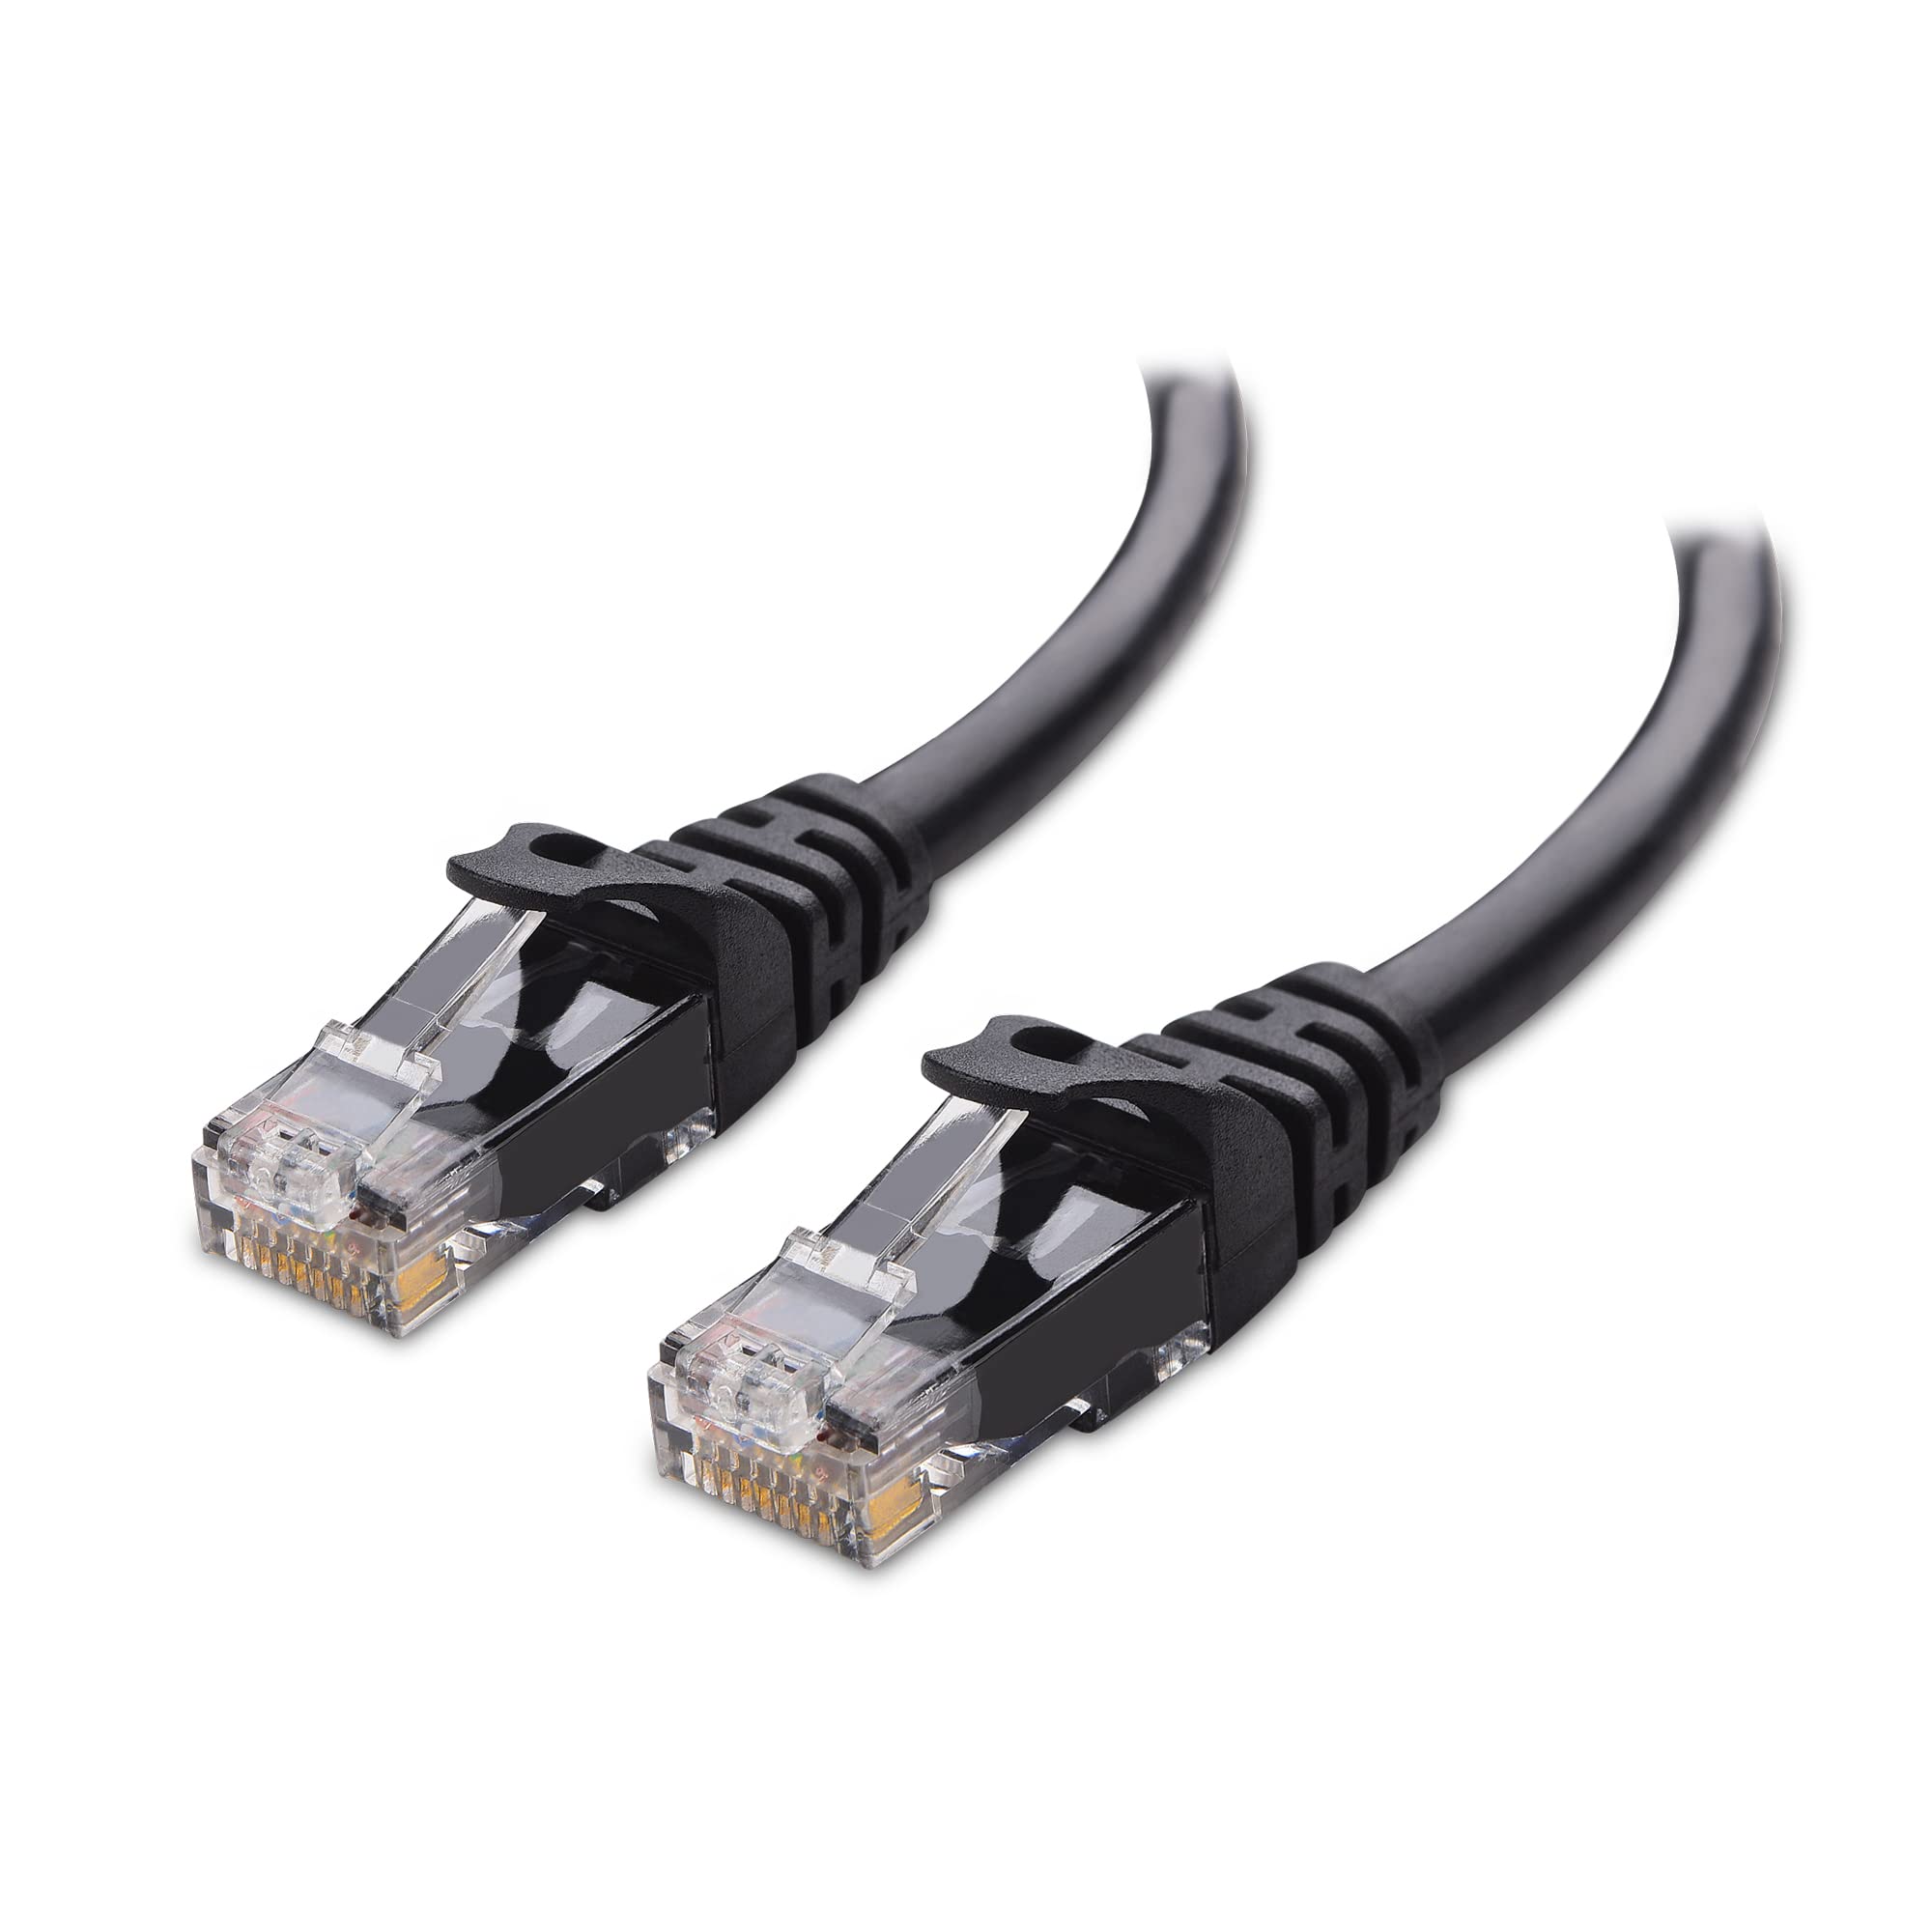 Network cables or Ethernet cables